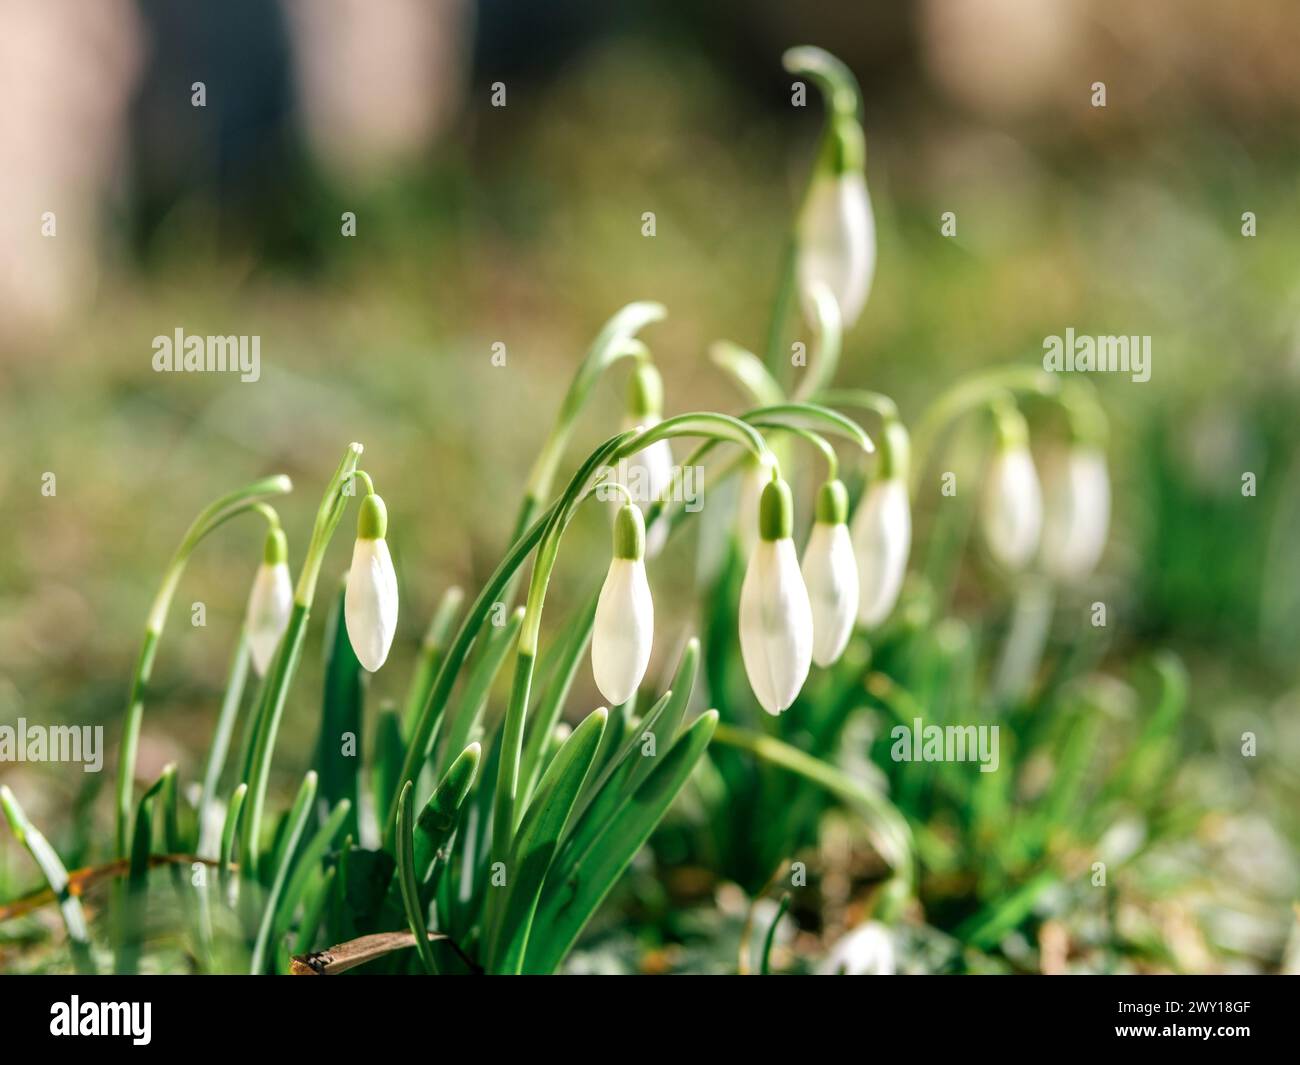 The gentle sway of snowdrops in Latvia's breeze brings a sense of renewal to the land Stock Photo